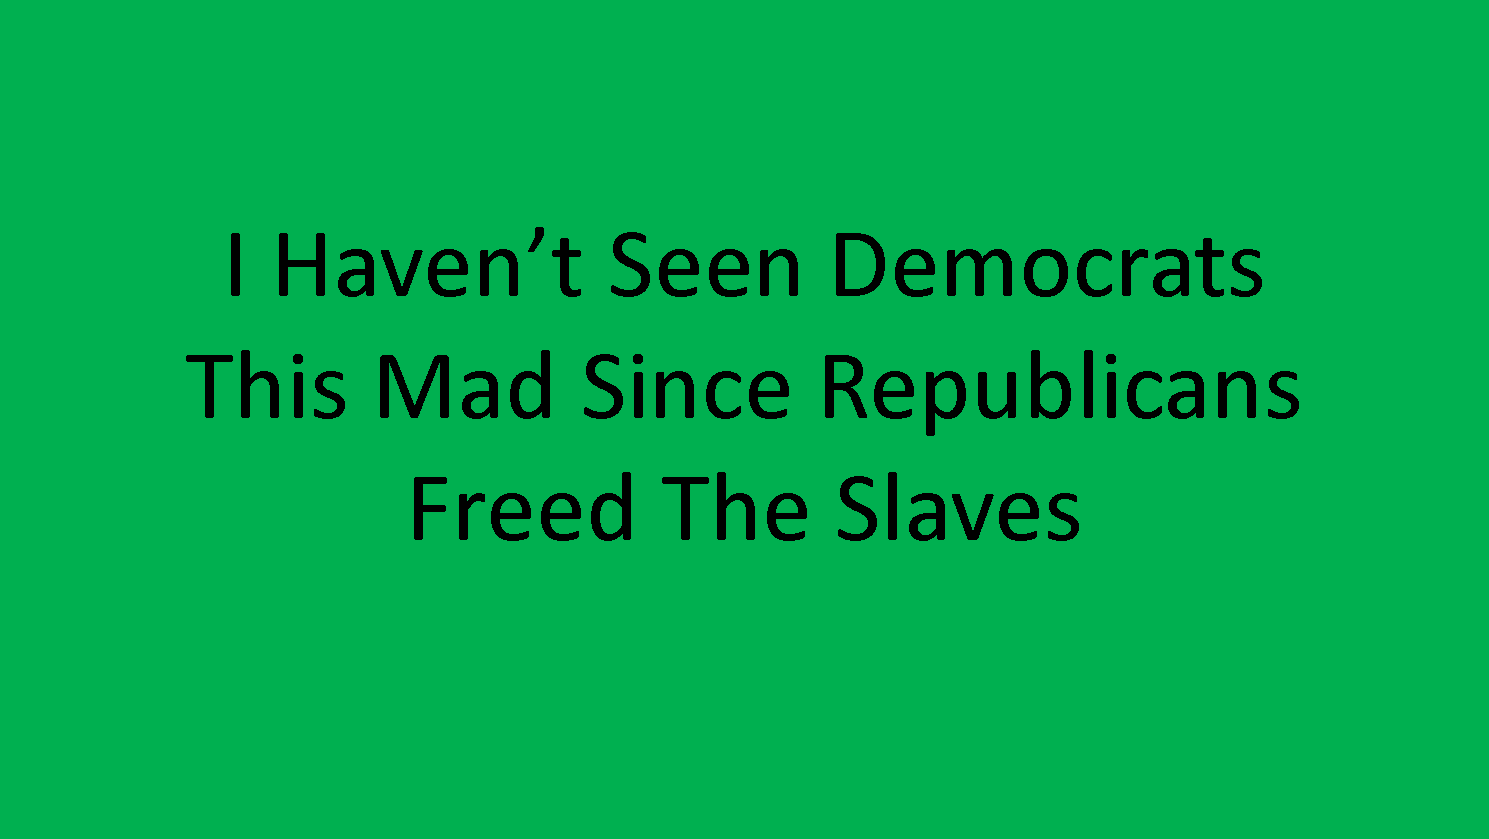 Freed The Slaves